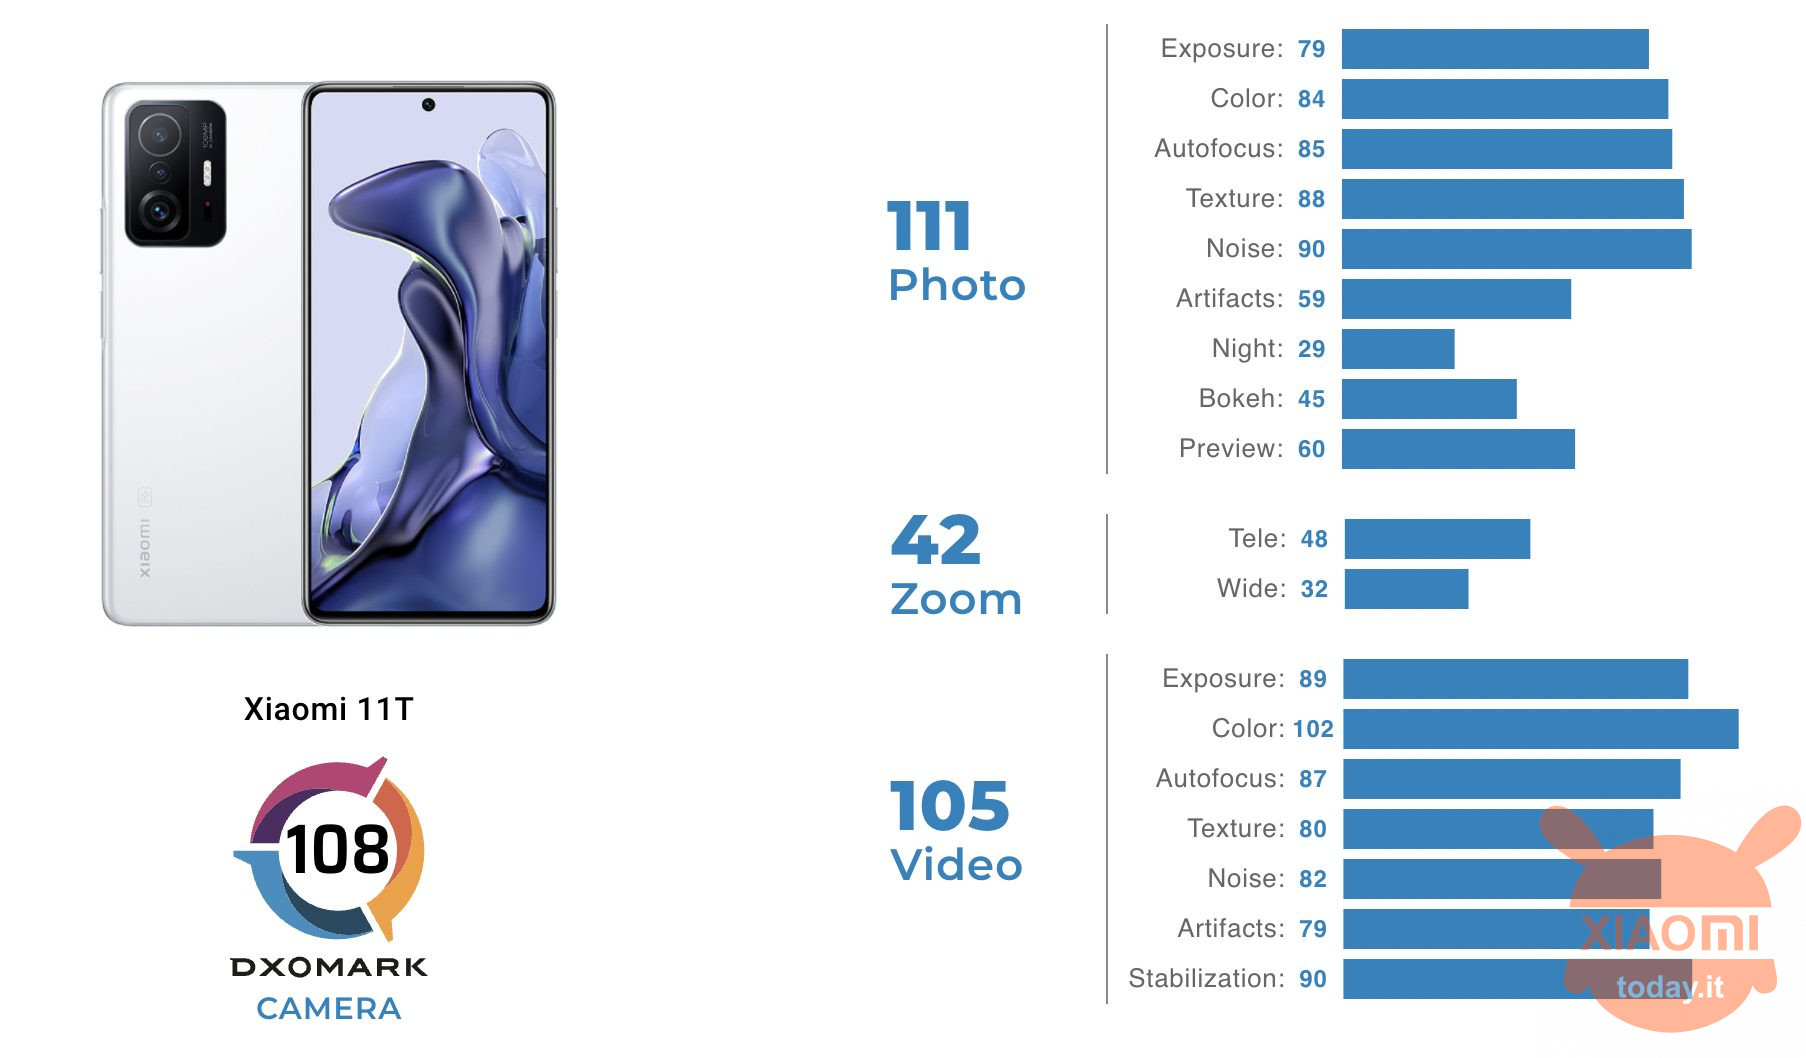 xiaomi 11t: how are the cameras? dxomark tells us